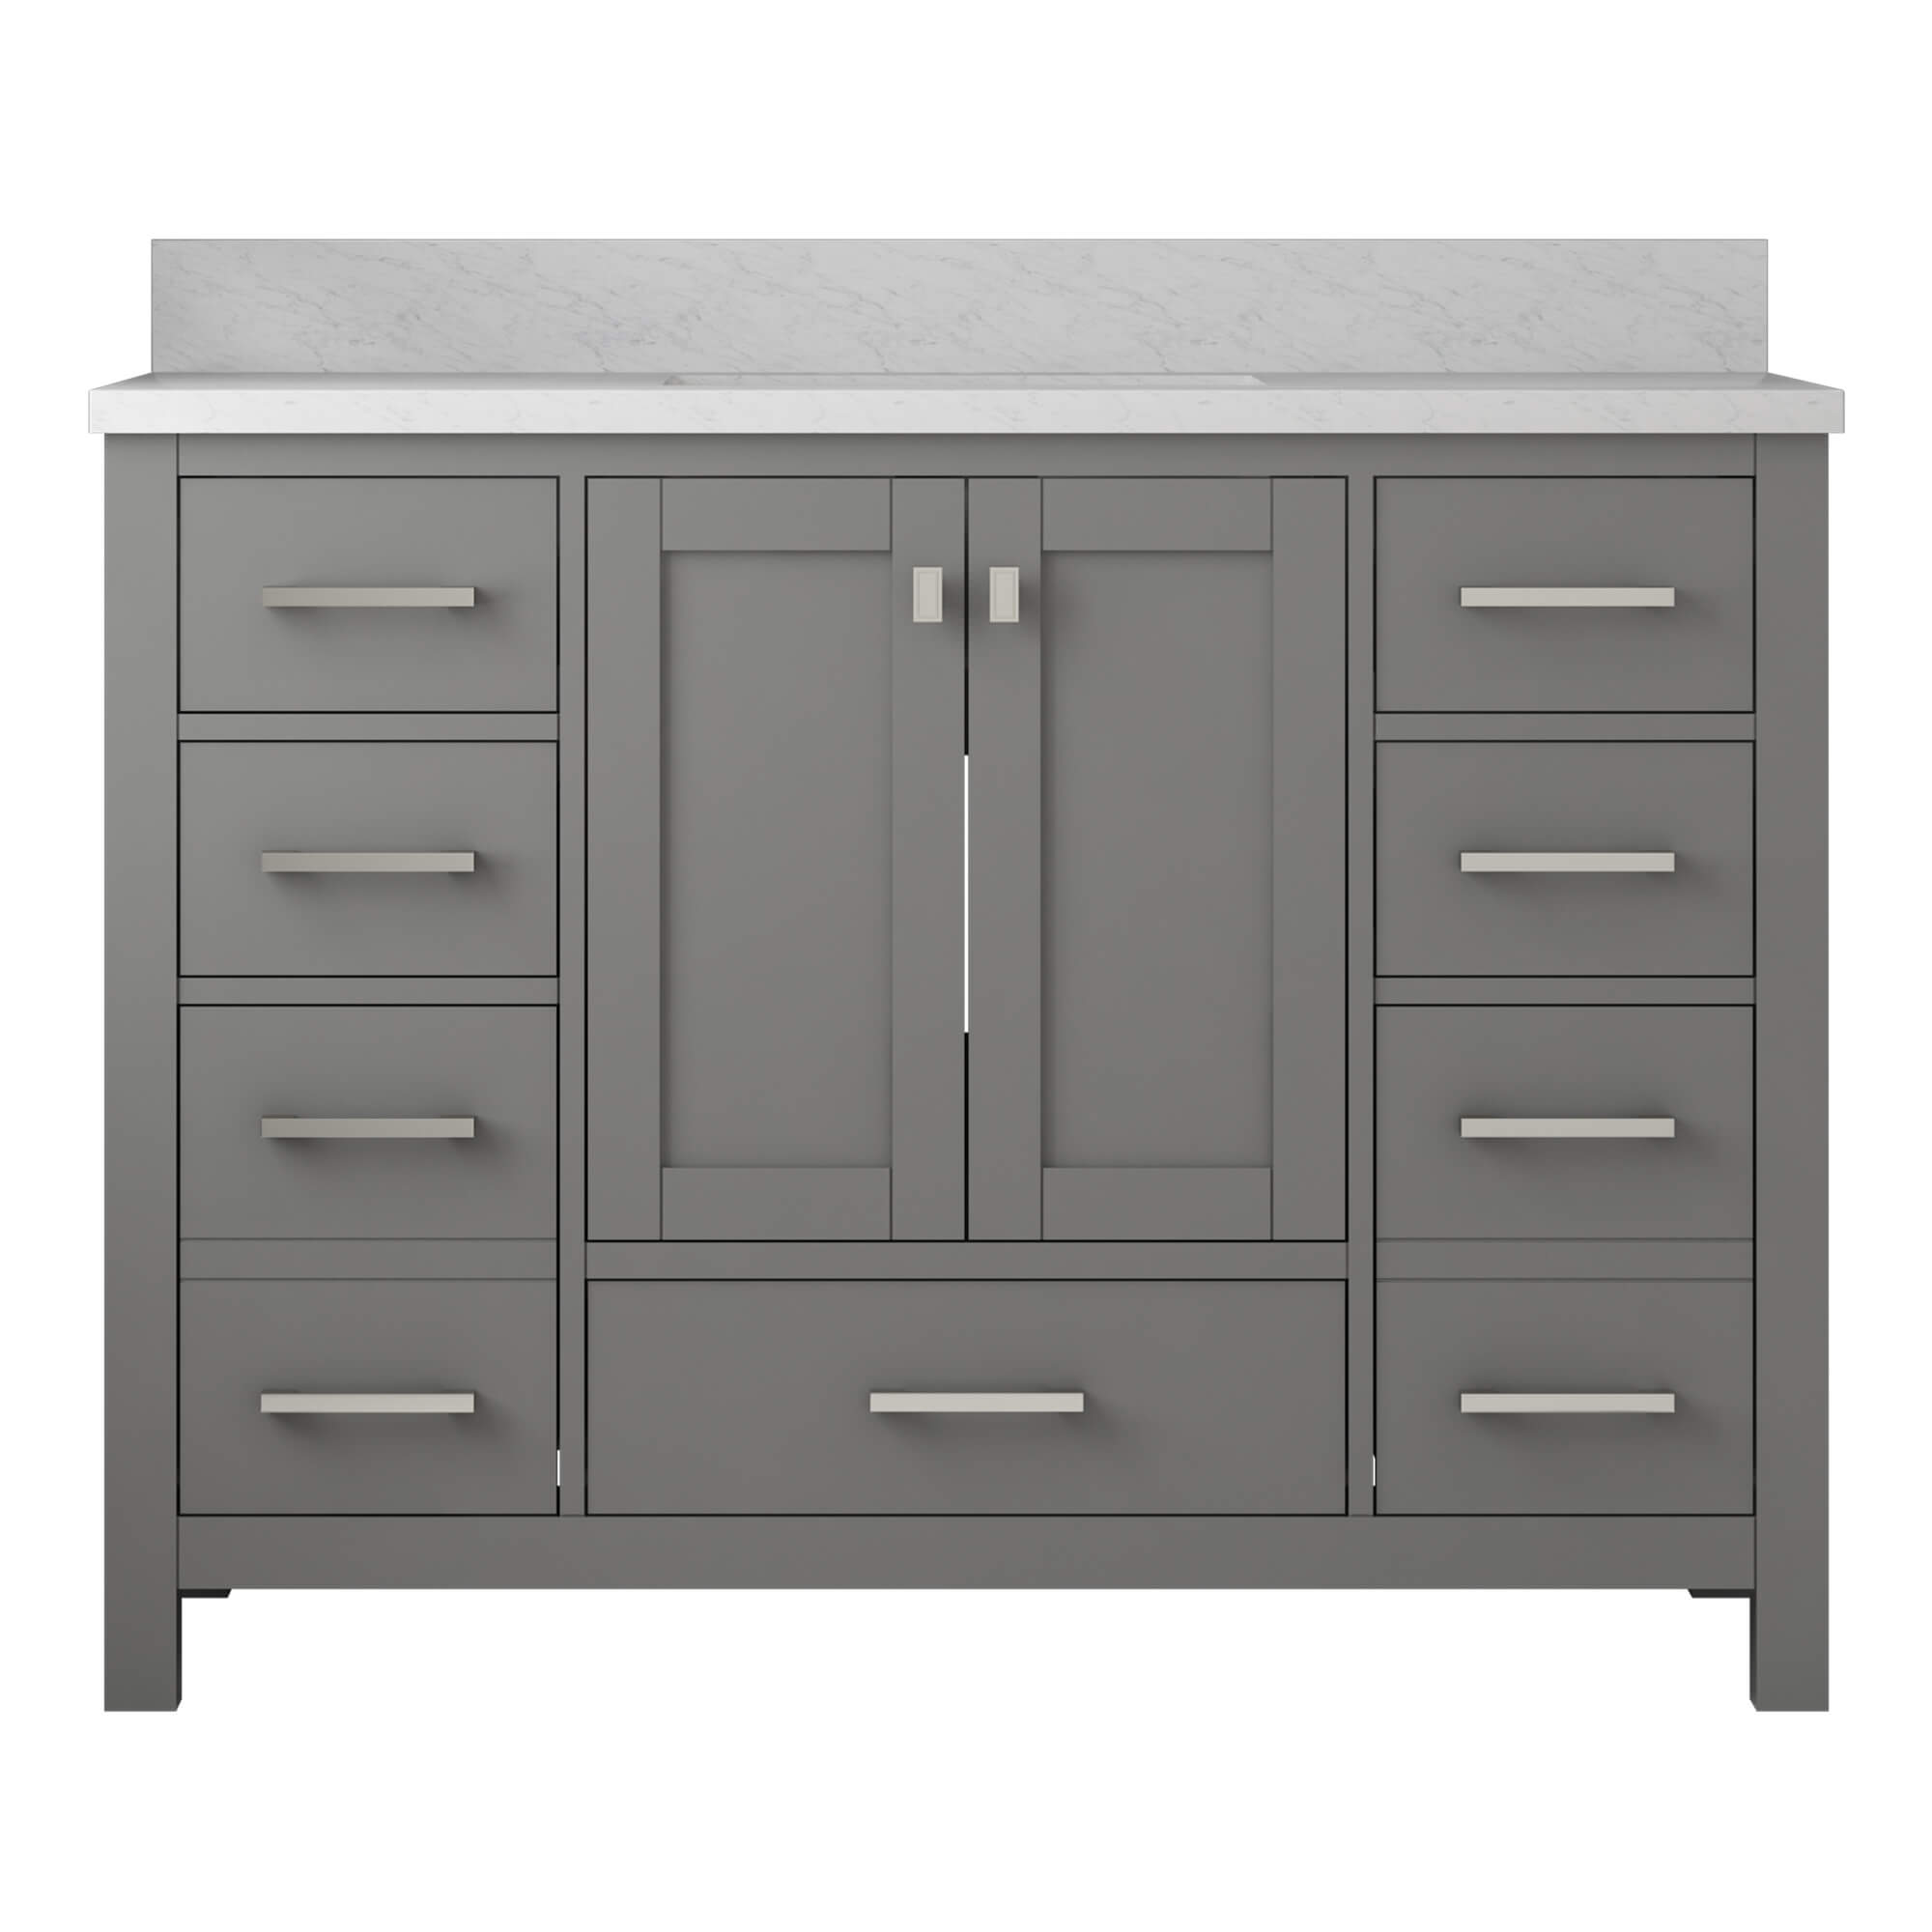 CASAINC 48 x 22 x 35.4 in. Solid Wood Bath Vanity with Carrara White Marble Countertop in Gray/White